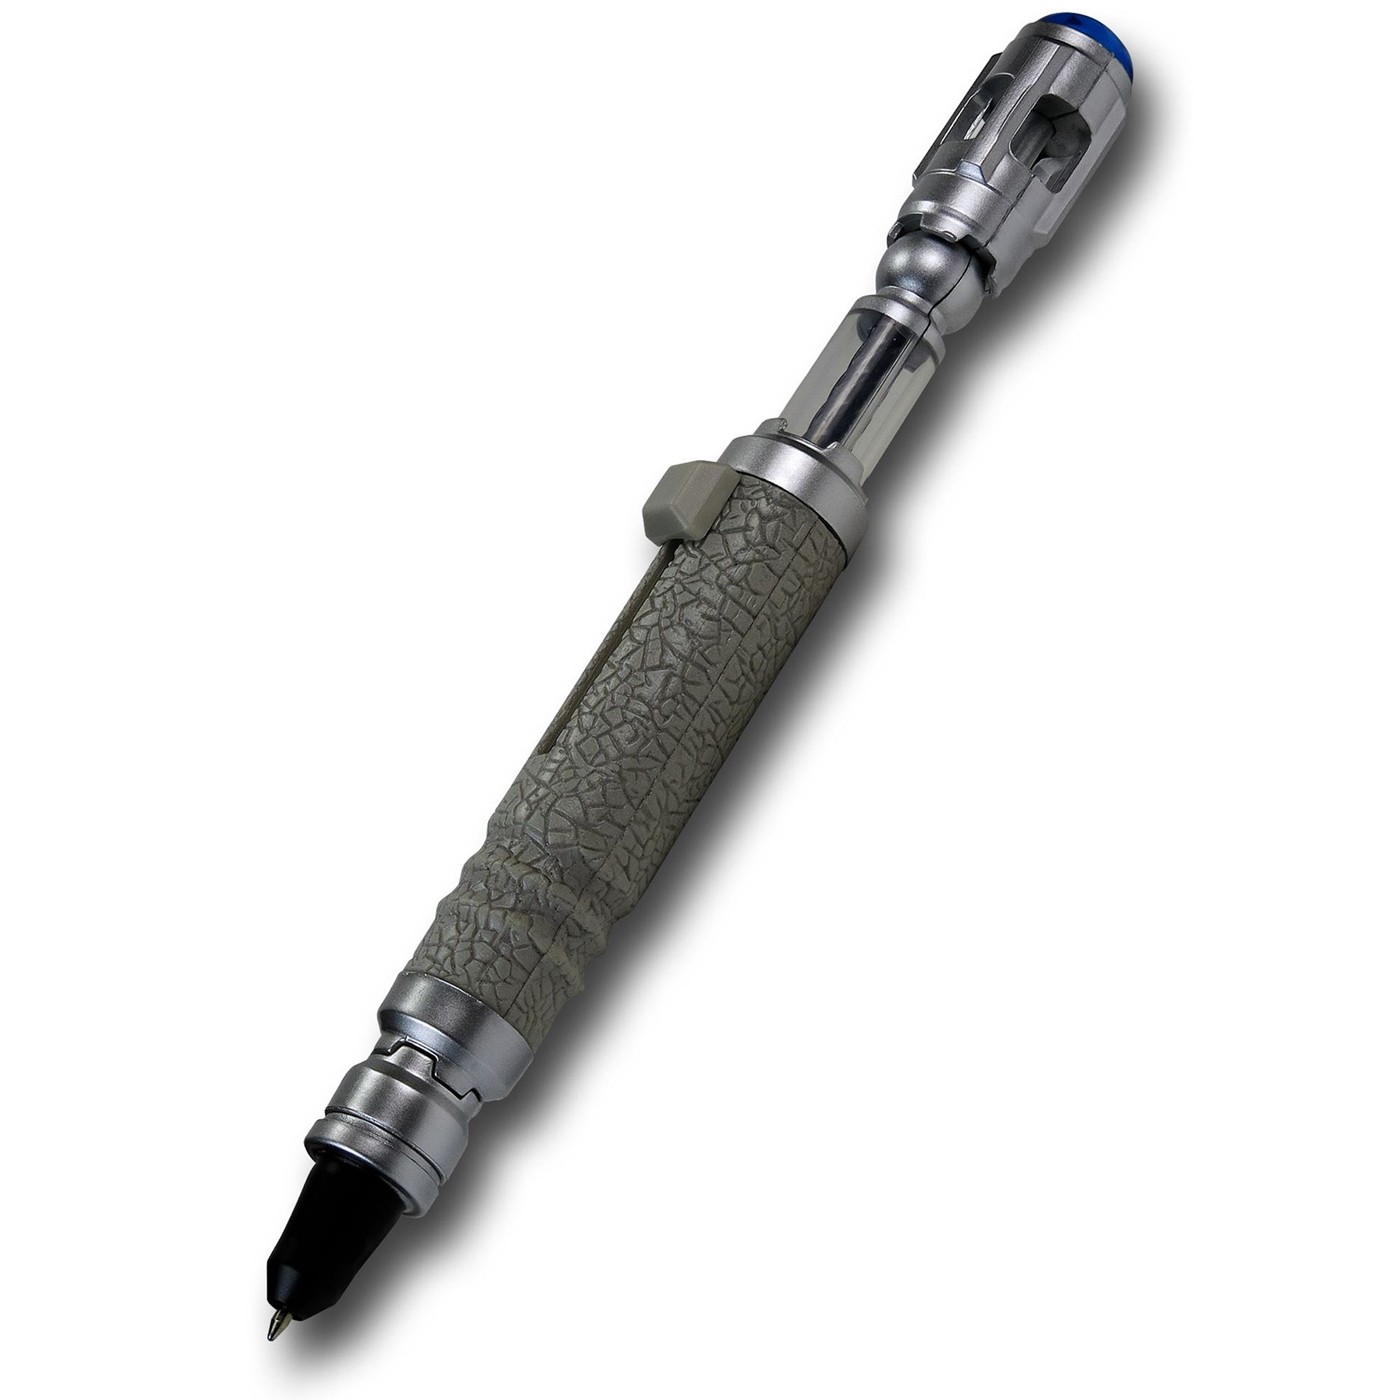 Doctor Who 10th Doctor Sonic Screwdriver